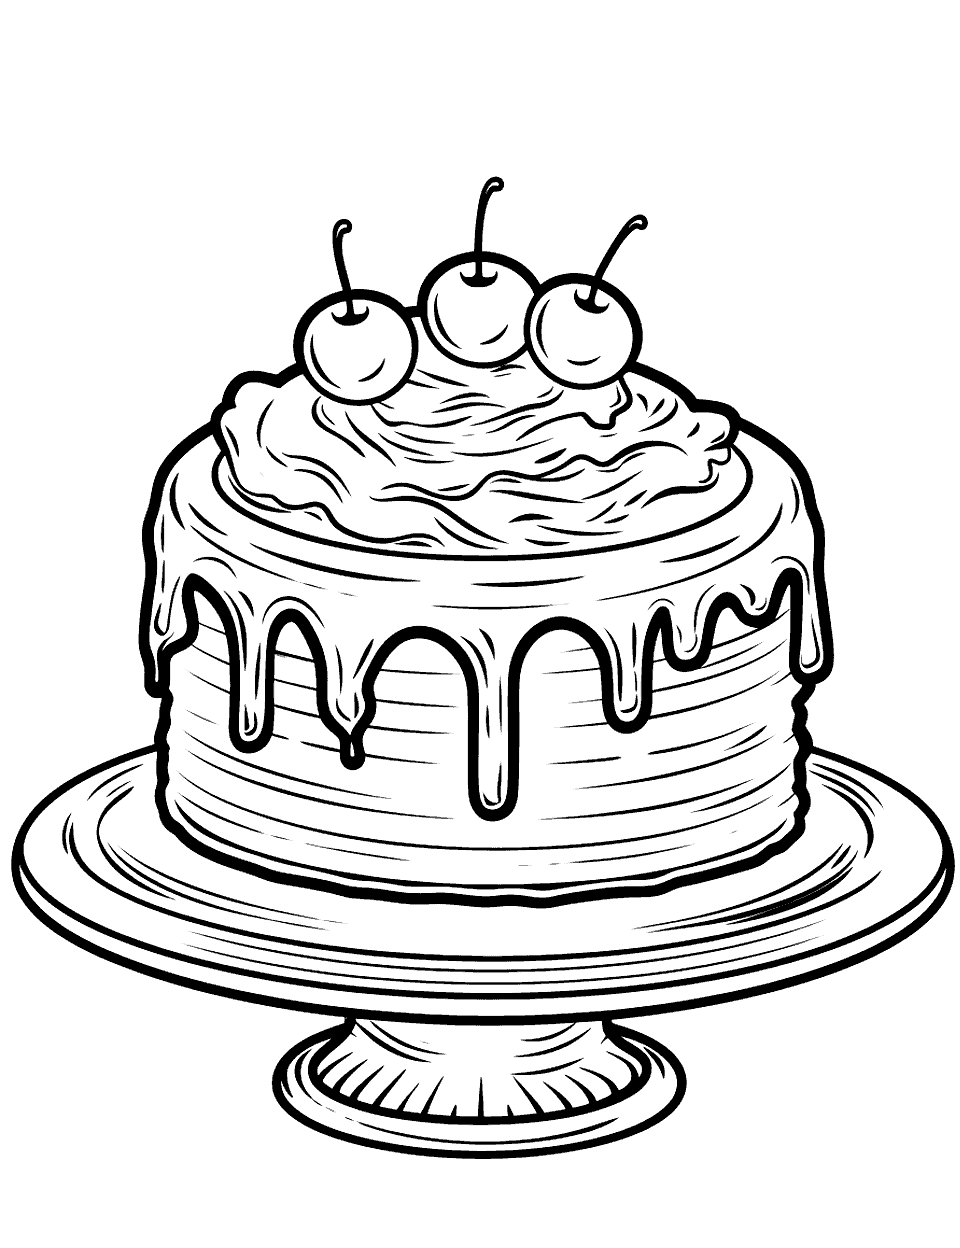 Chocolate Delight Cake Coloring Page - A rich, chocolate cake with dripping chocolate icing.